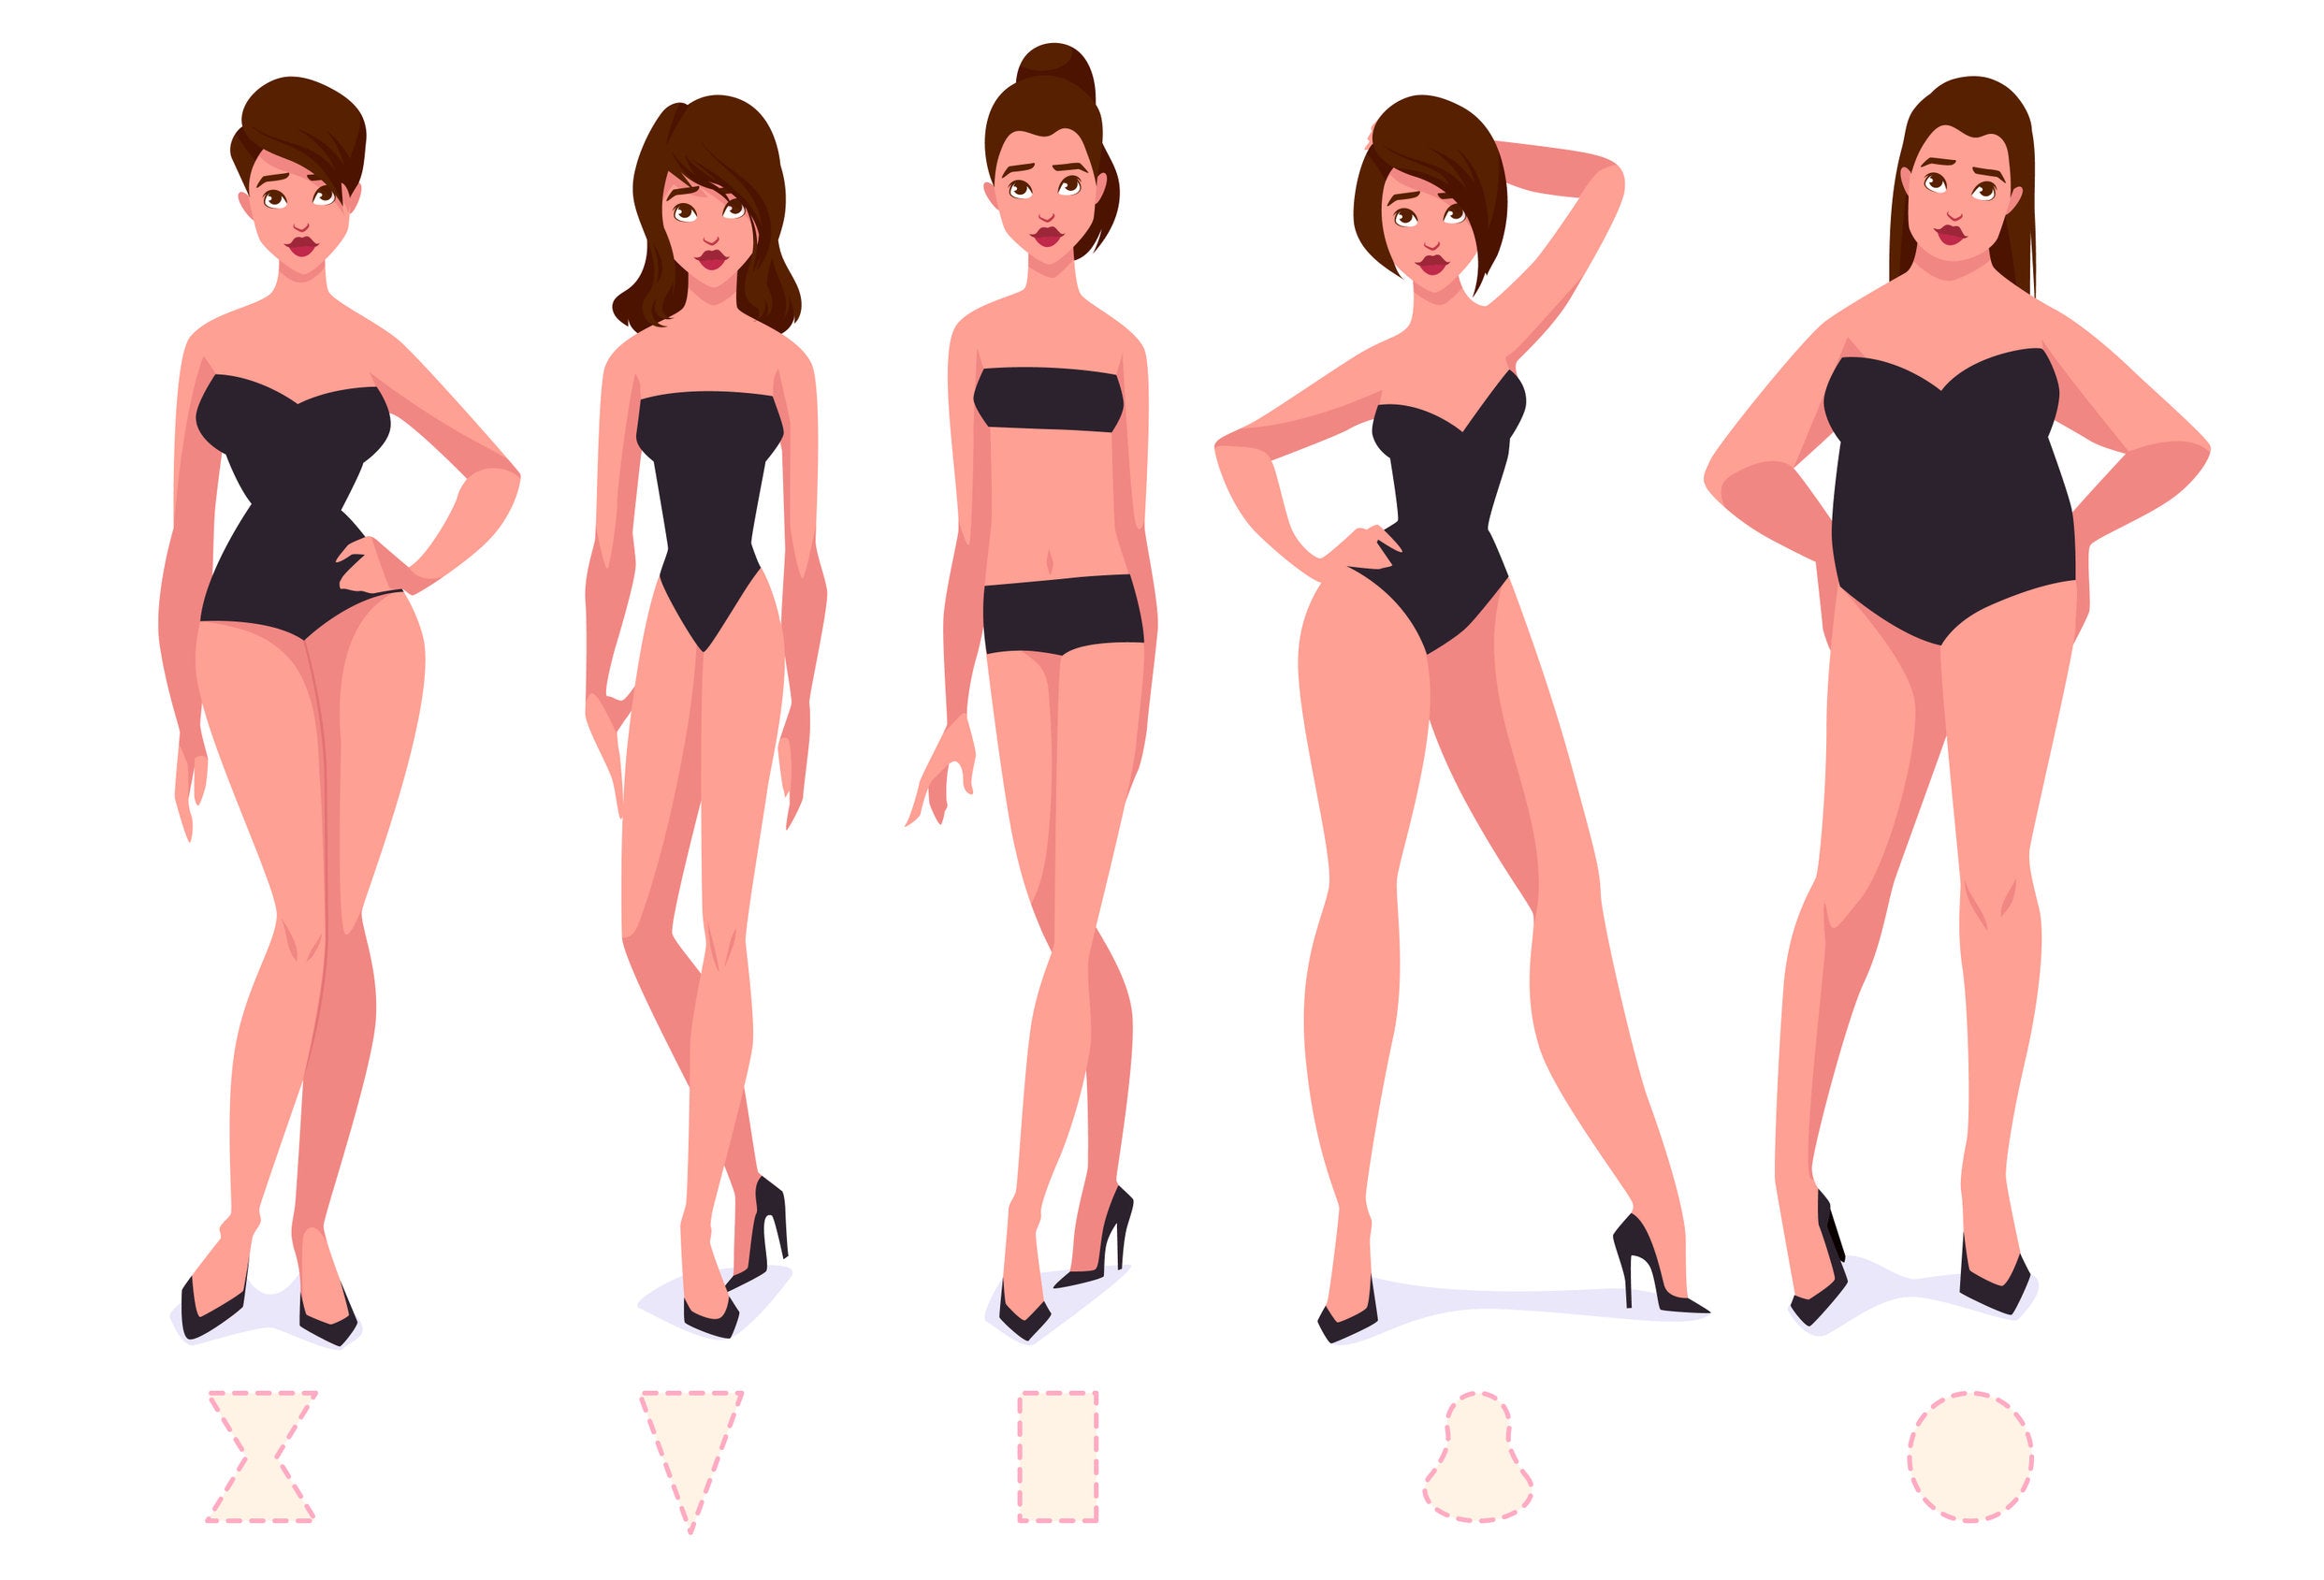 What to wear if you have a ROUND BODYSHAPE or an Apple shape - SewGuide